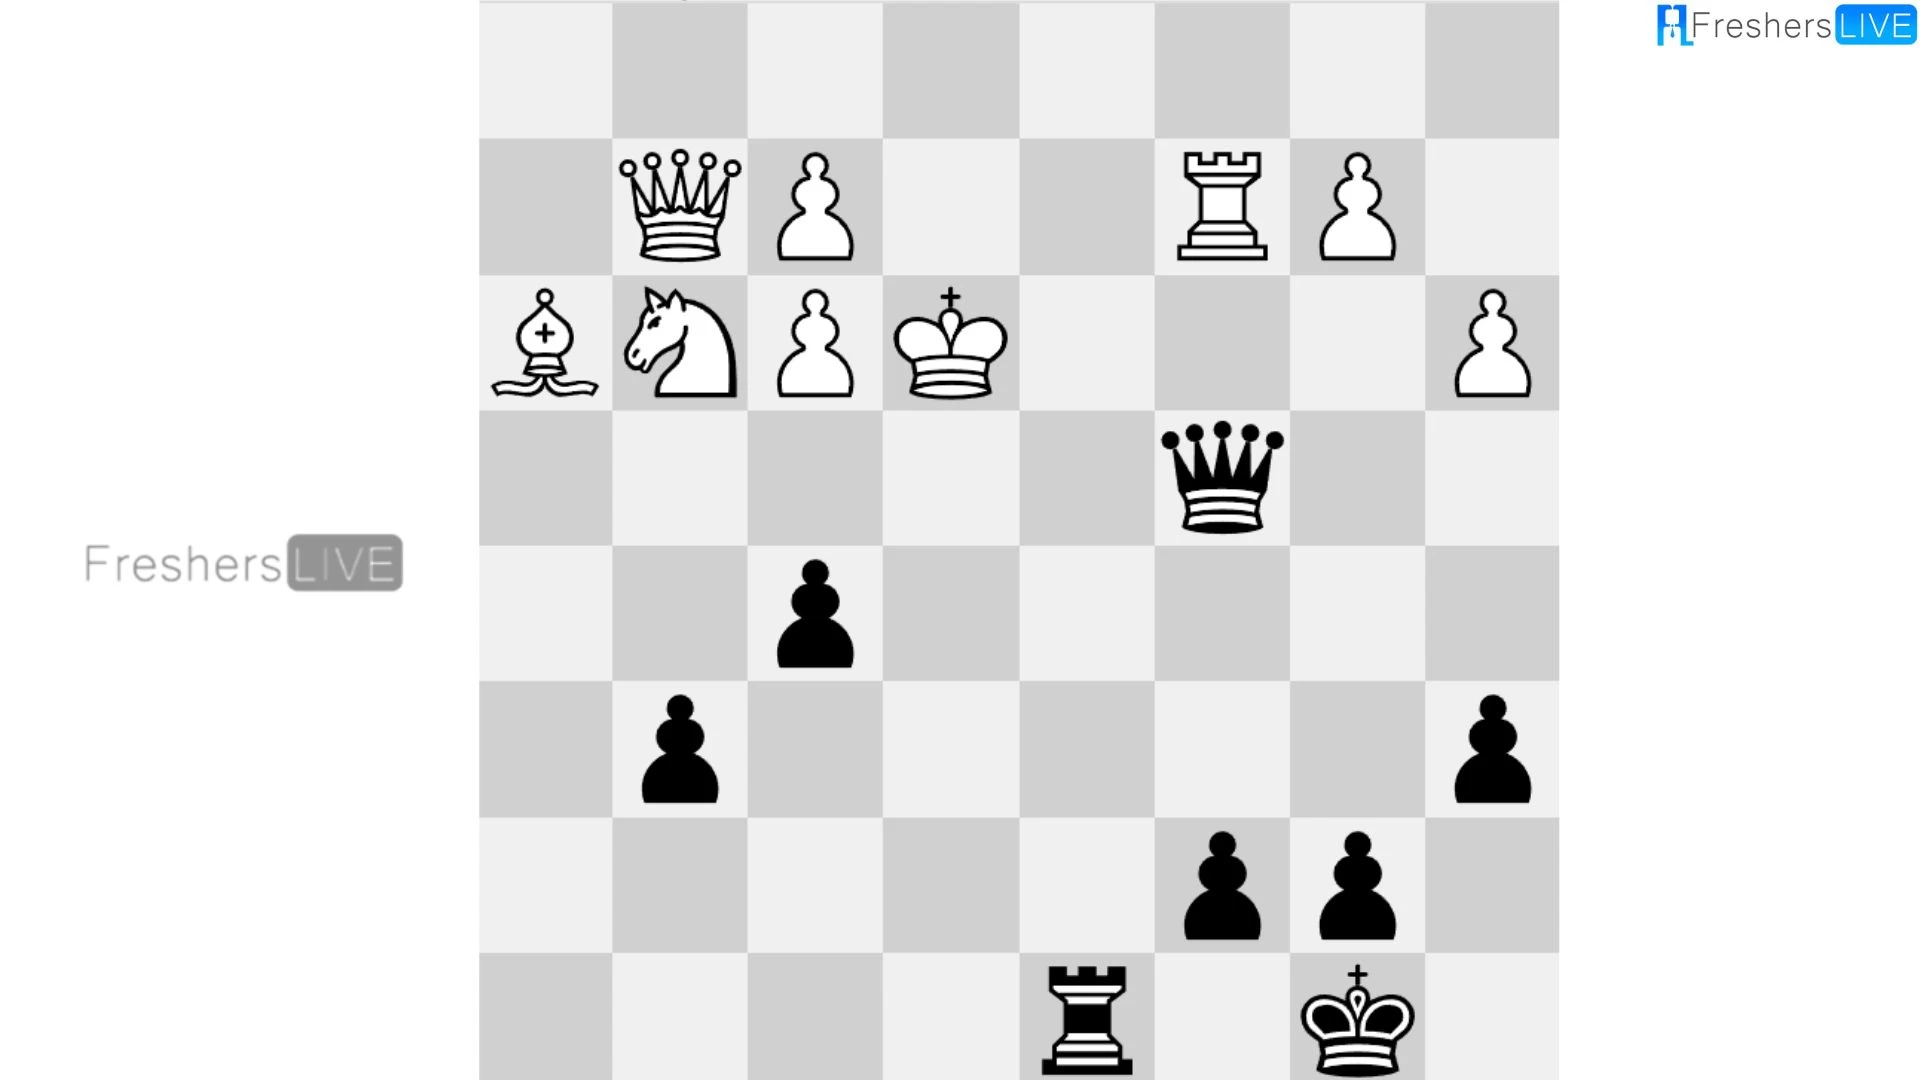 Can You Win This Chess Puzzle in Only One Move?